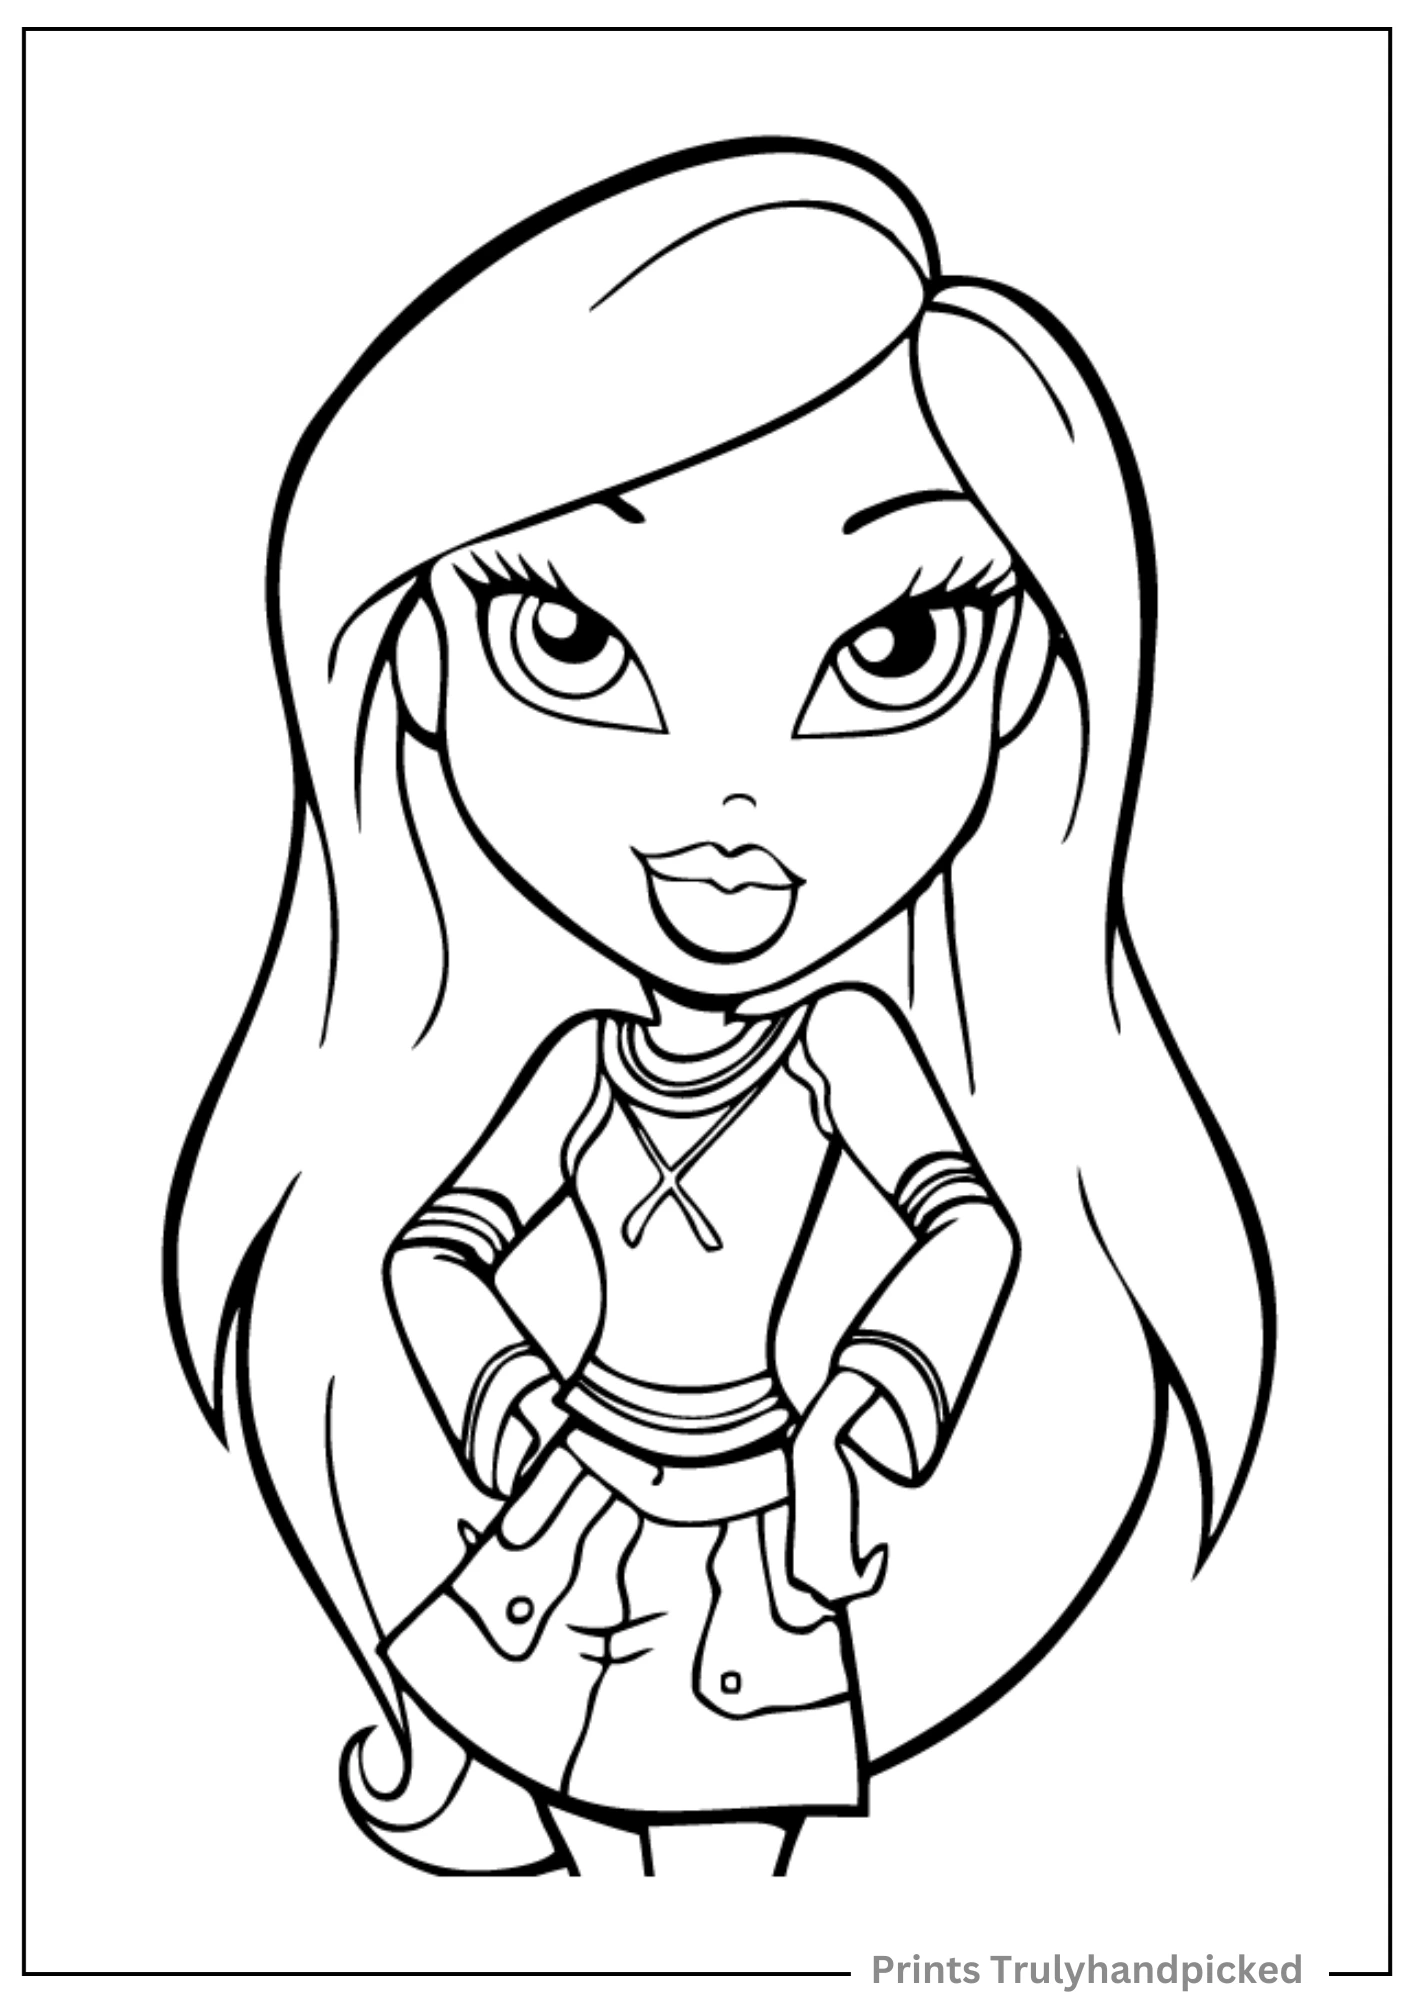 Cute Bratz Doll Coloring Page